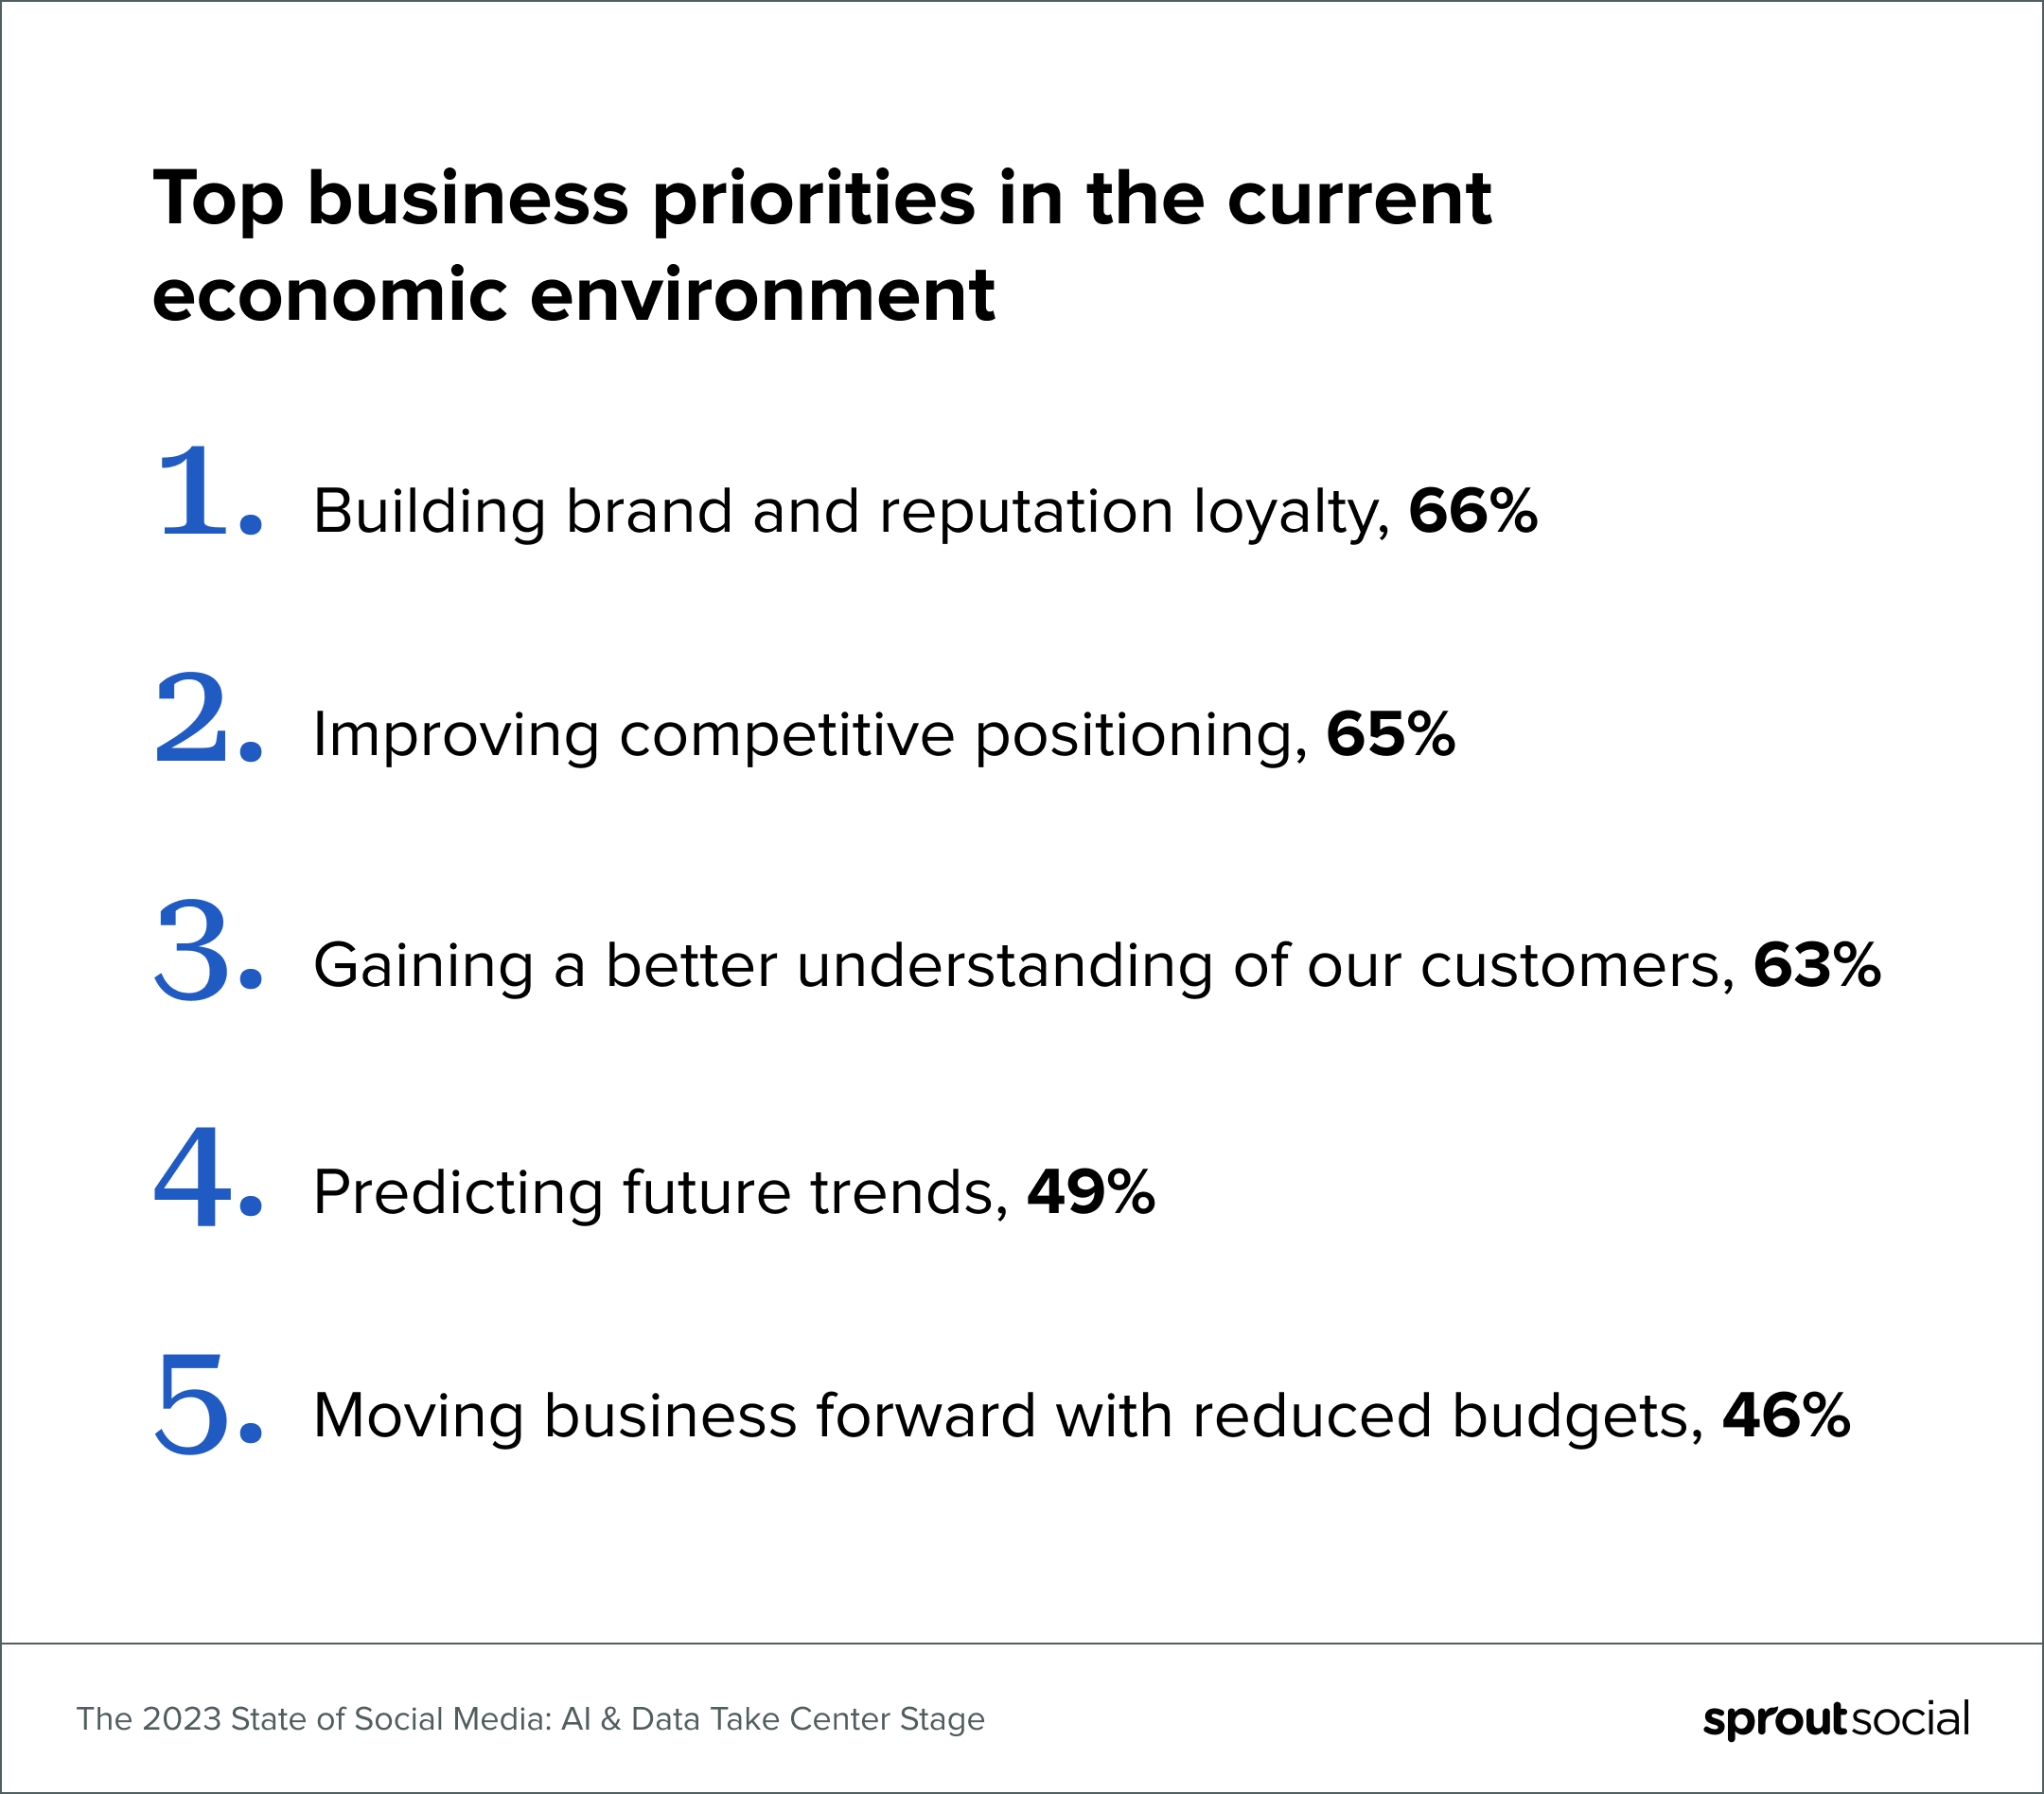 A data visualization that list the top business priorities in the current economic environment. 66% of leaders said building brand and reputation loyalty, 65% said improving competitive positioning, 63% gaining a better understanding of customers, 49% said predicting future trends and 46% said moving business forward with reduced budgets.